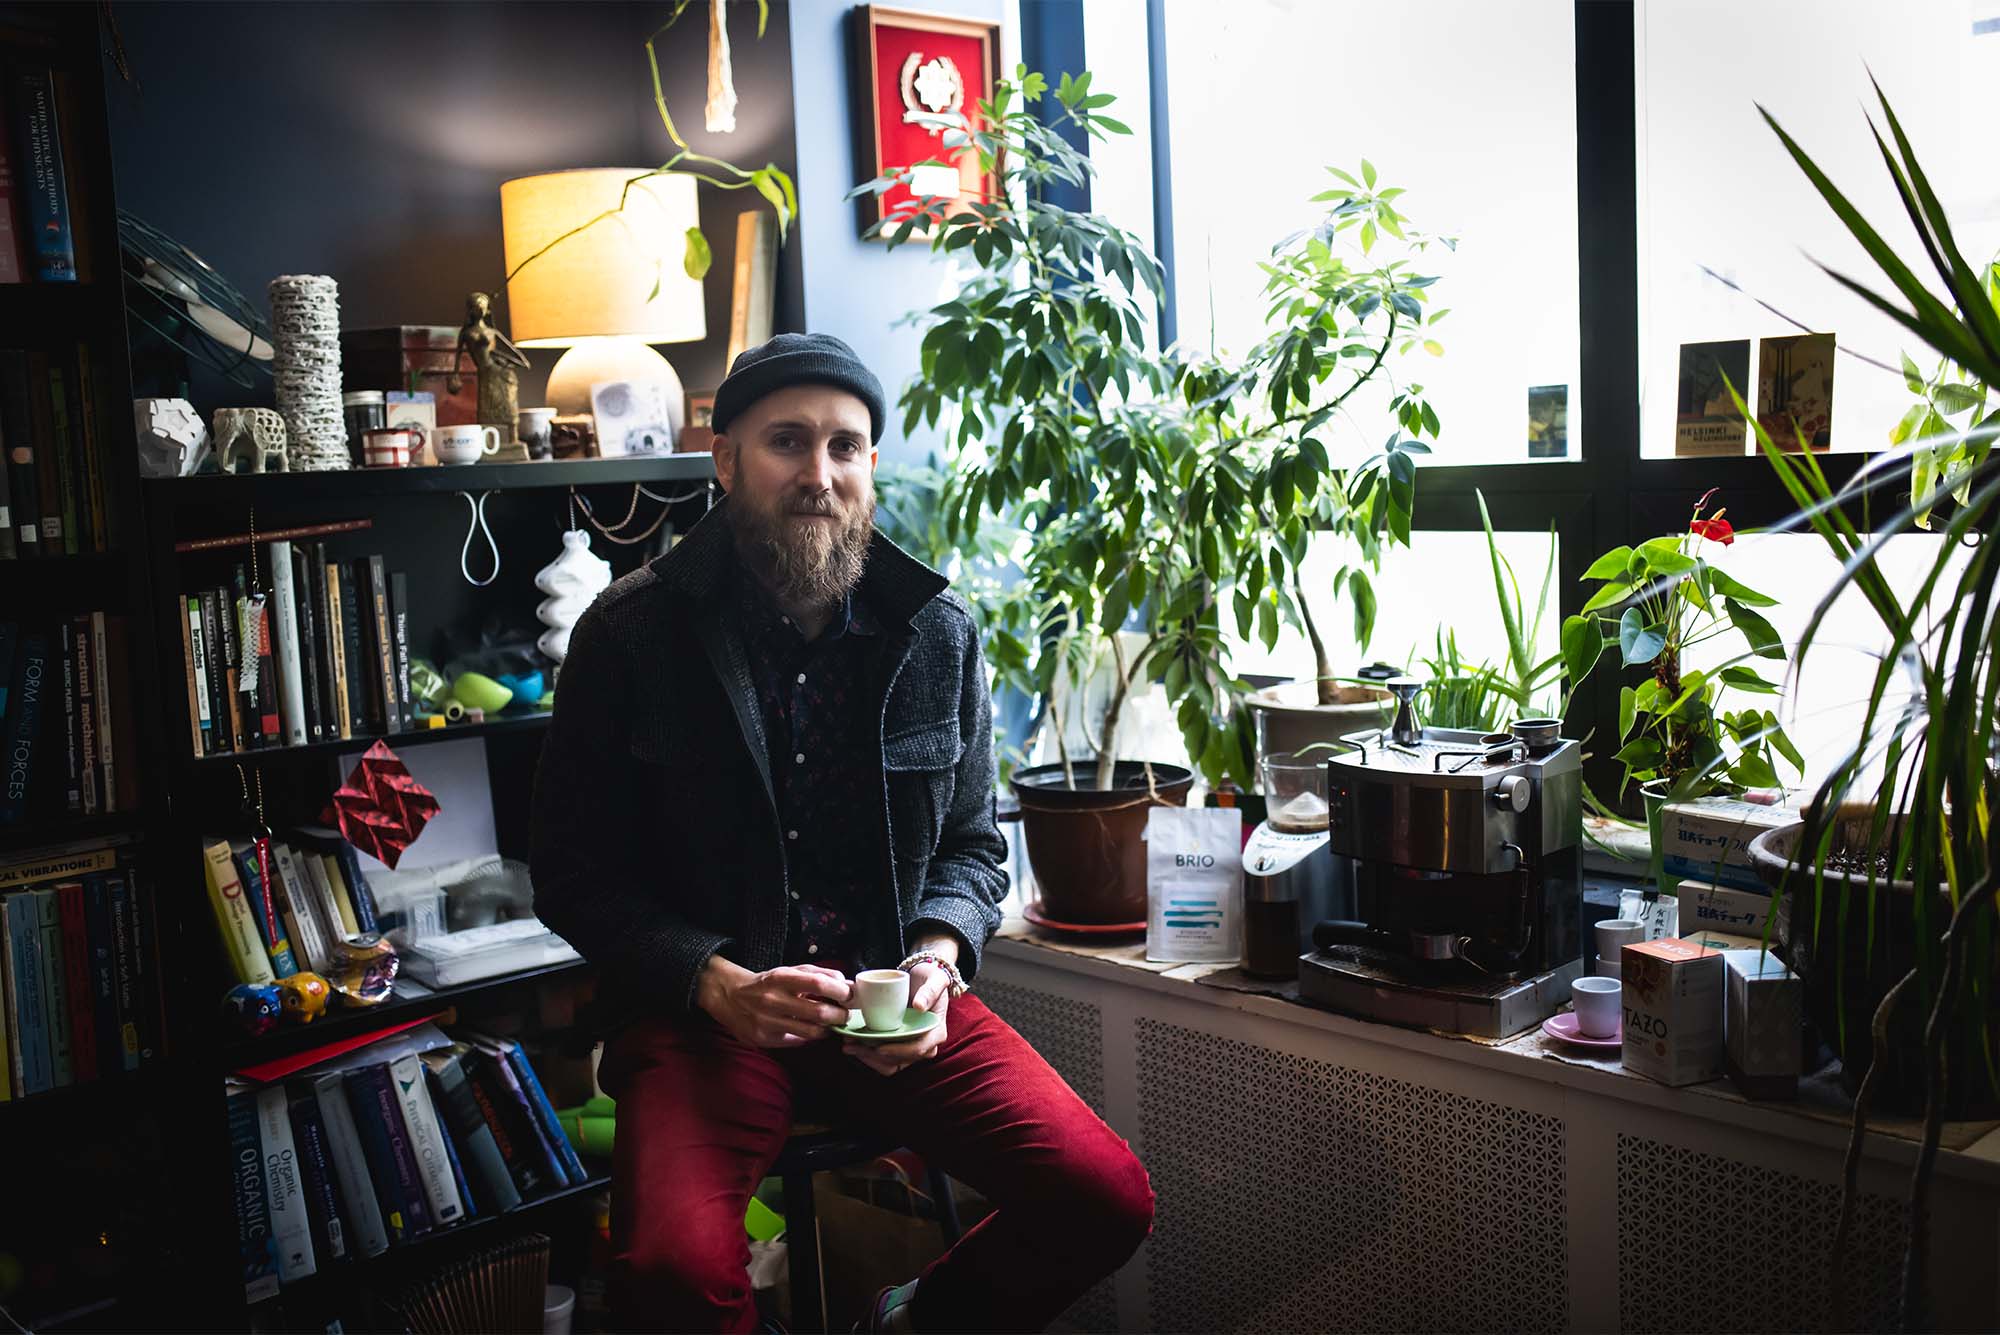 Photo: A man wearing a beanie and flannel sits in front of a window filled with plants, holding a small cup of coffee